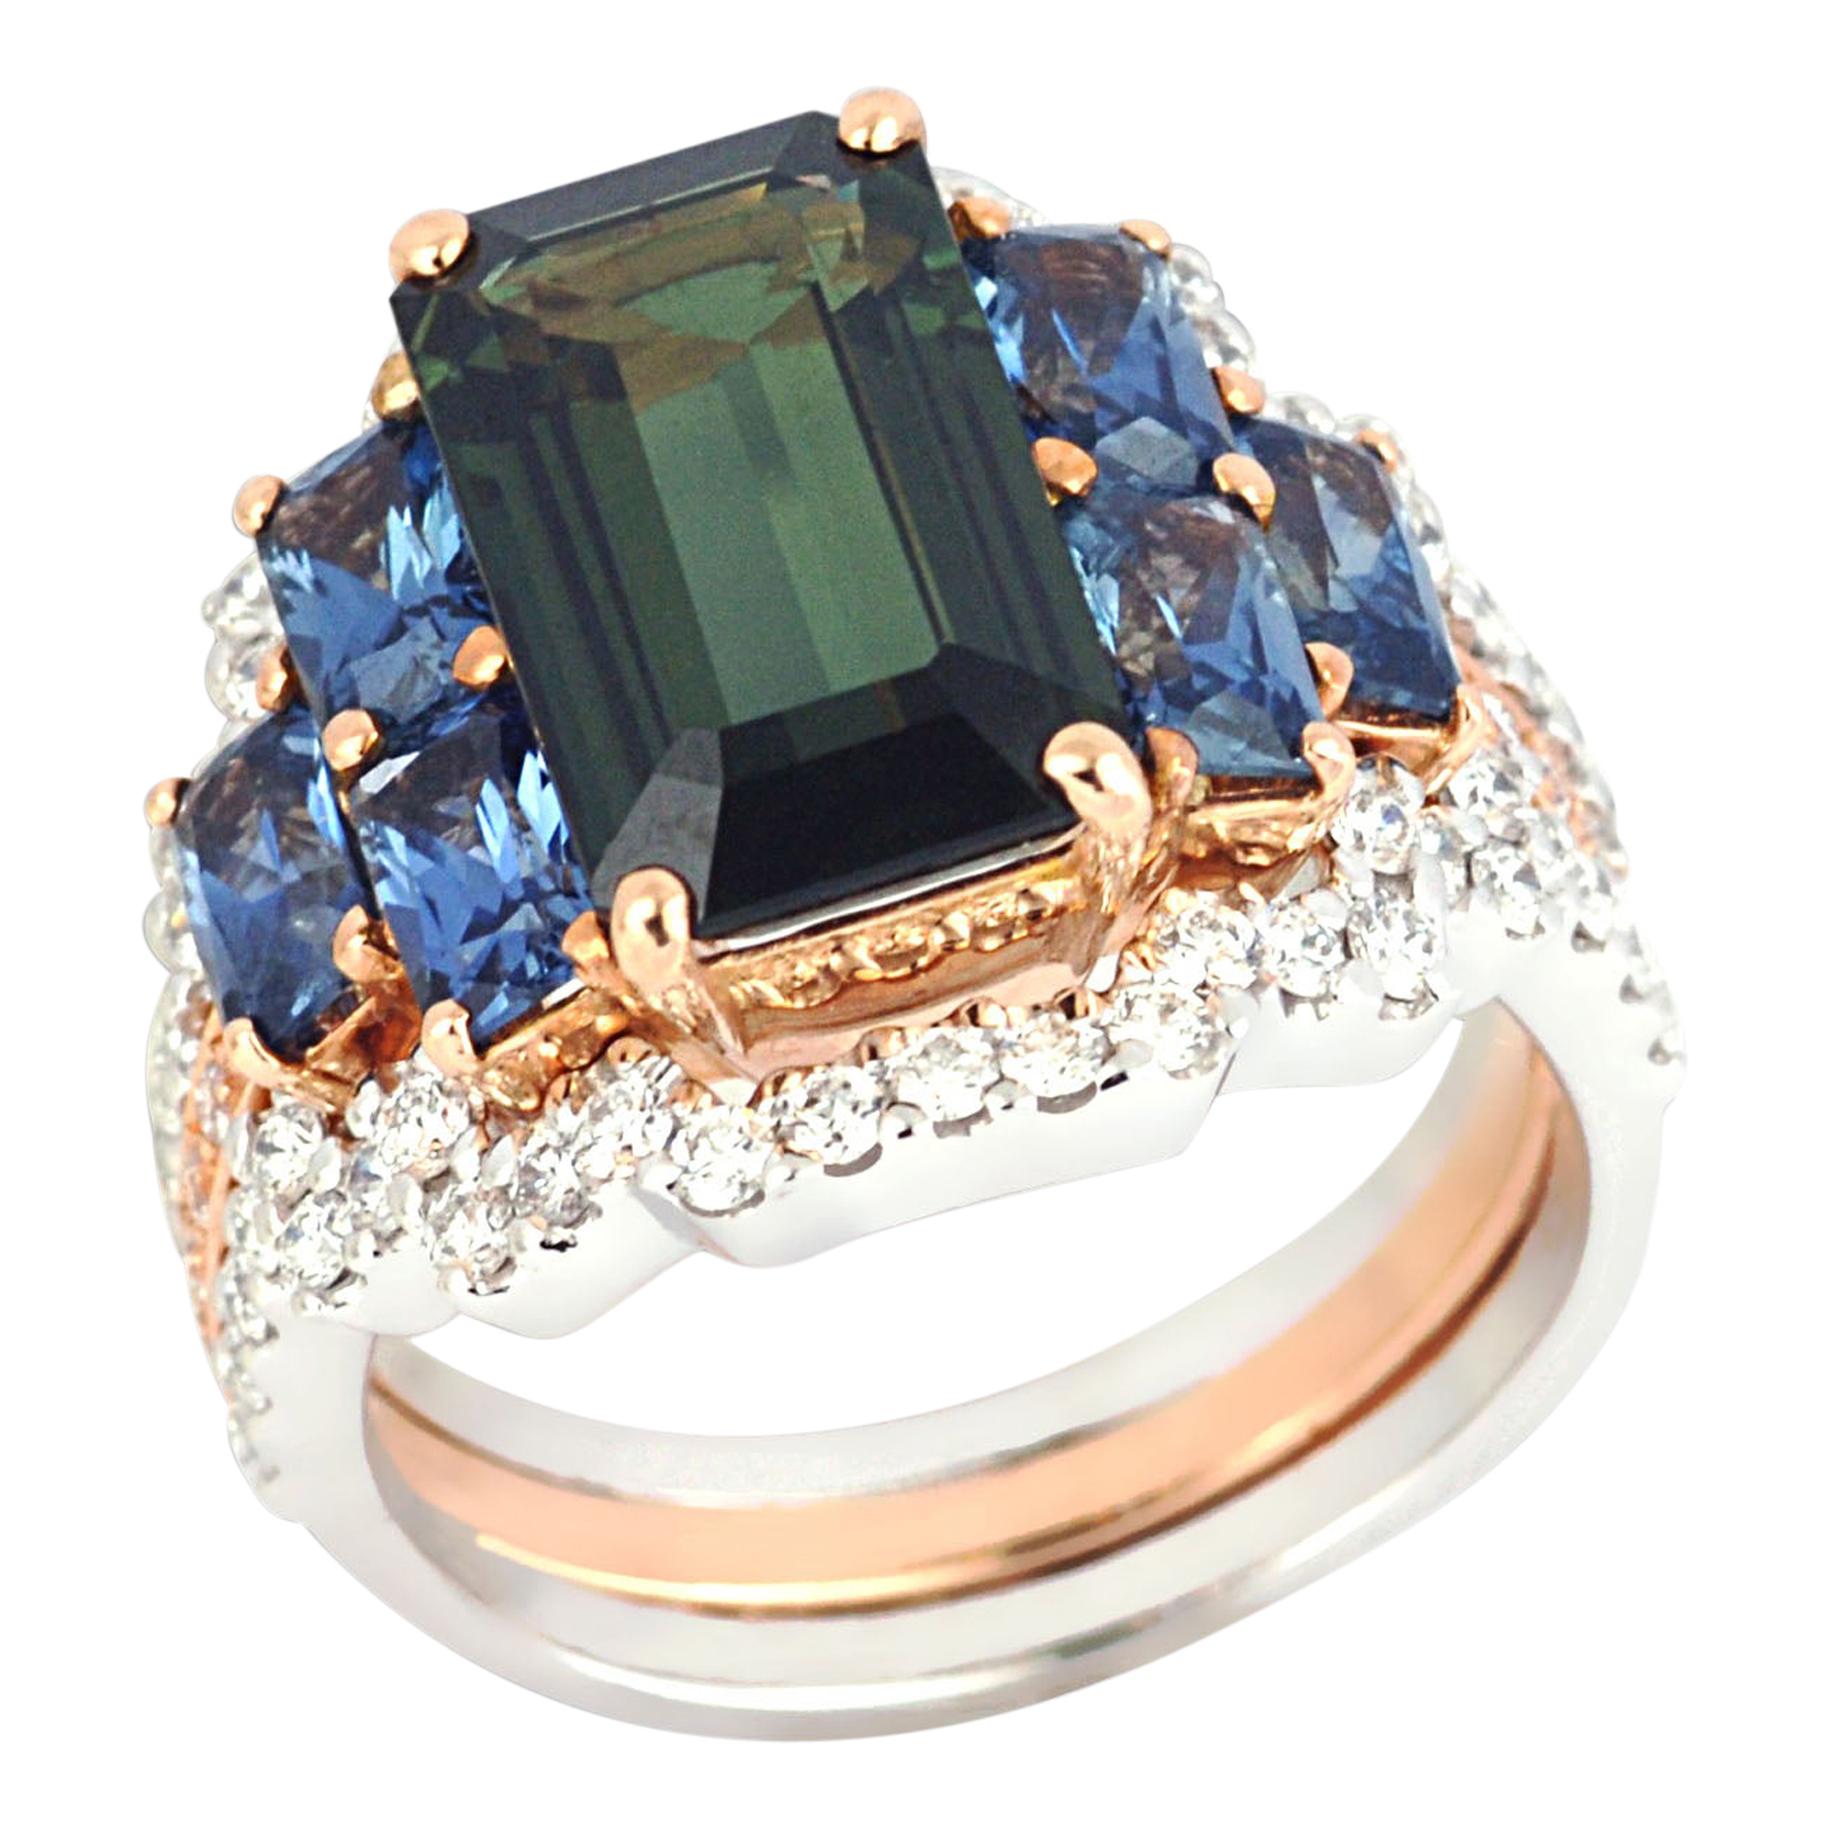 Green Sapphire, Blue Sapphire with Jacket Diamond Ring in 18K White/Pink Gold For Sale